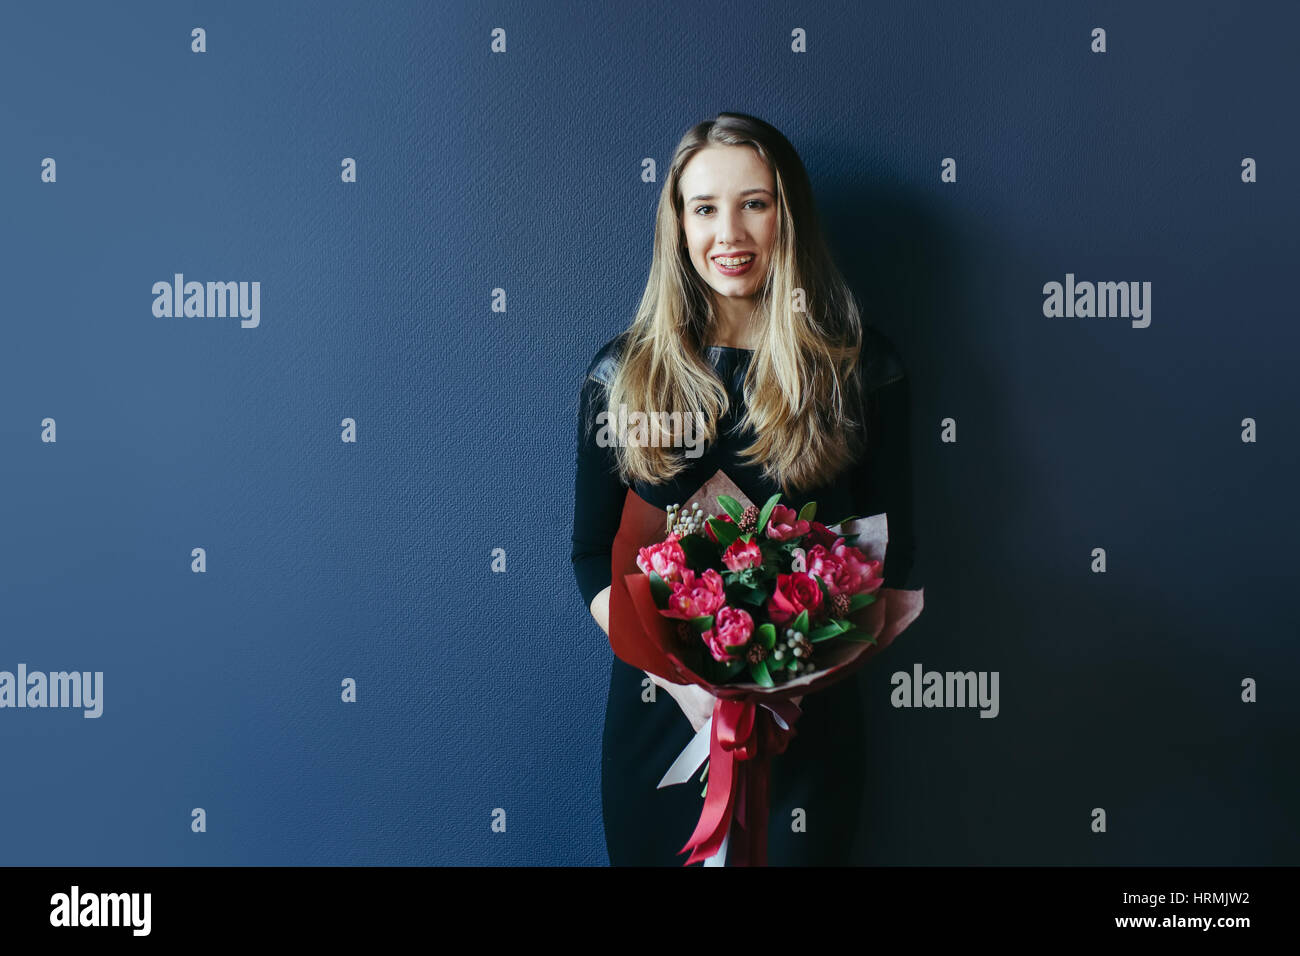 Girlfriend with bouquet of red tulips. Studio. Stock Photo